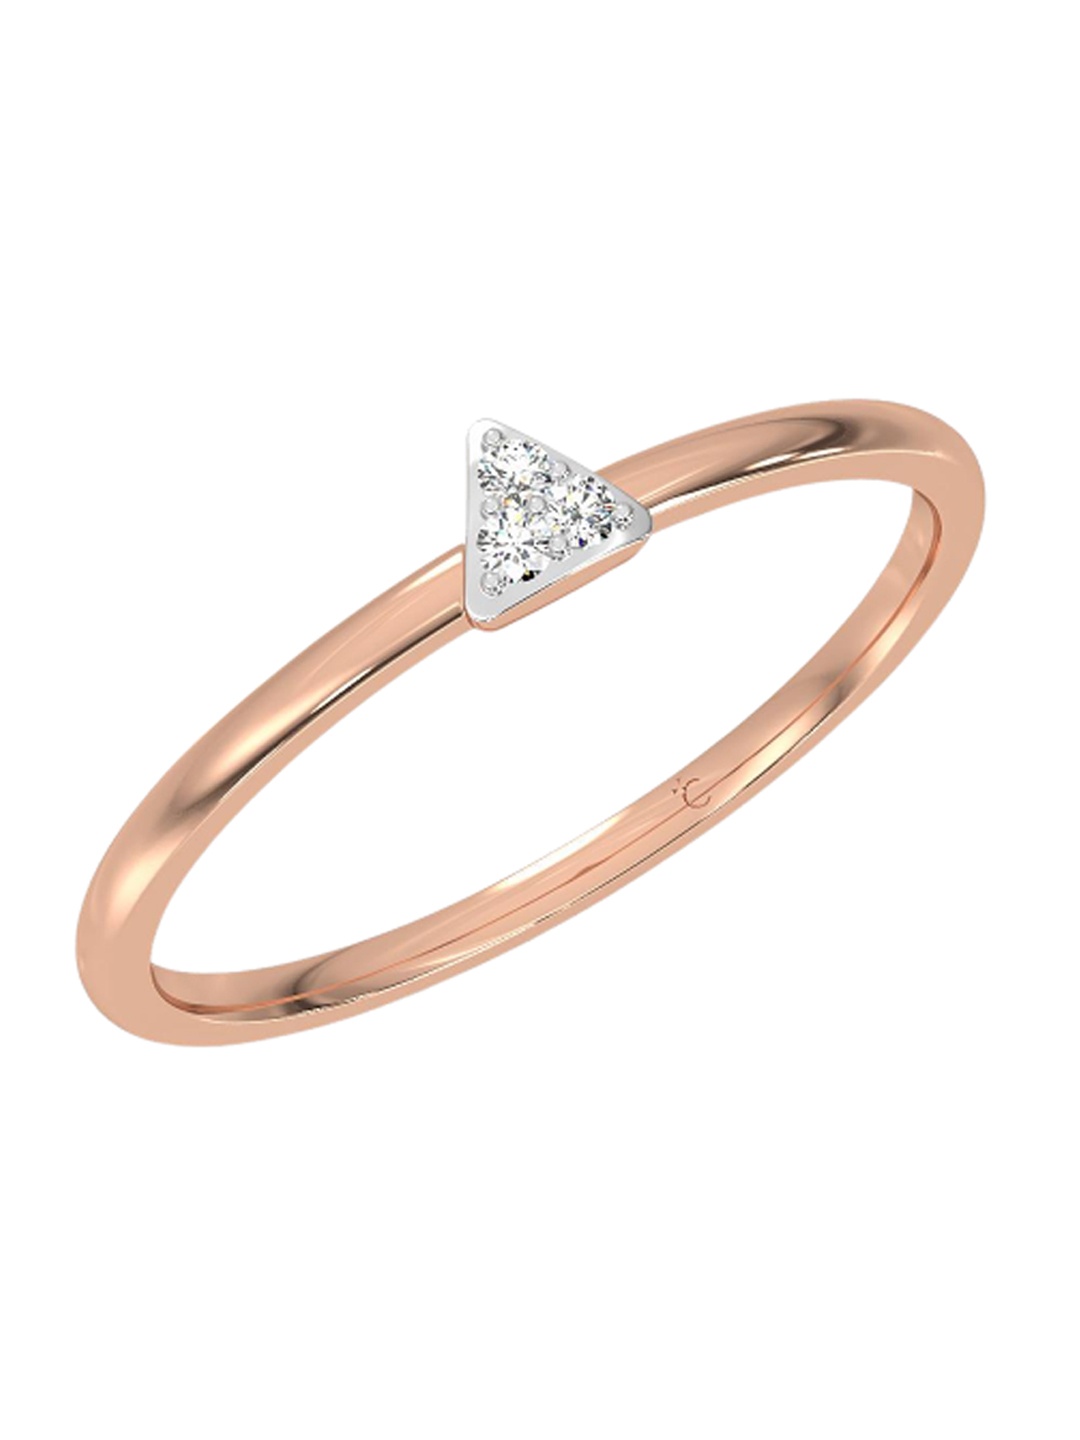 

CANDERE A KALYAN JEWELLERS COMPANY 18KT Rose Gold Diamond Finger Ring 1.22 g